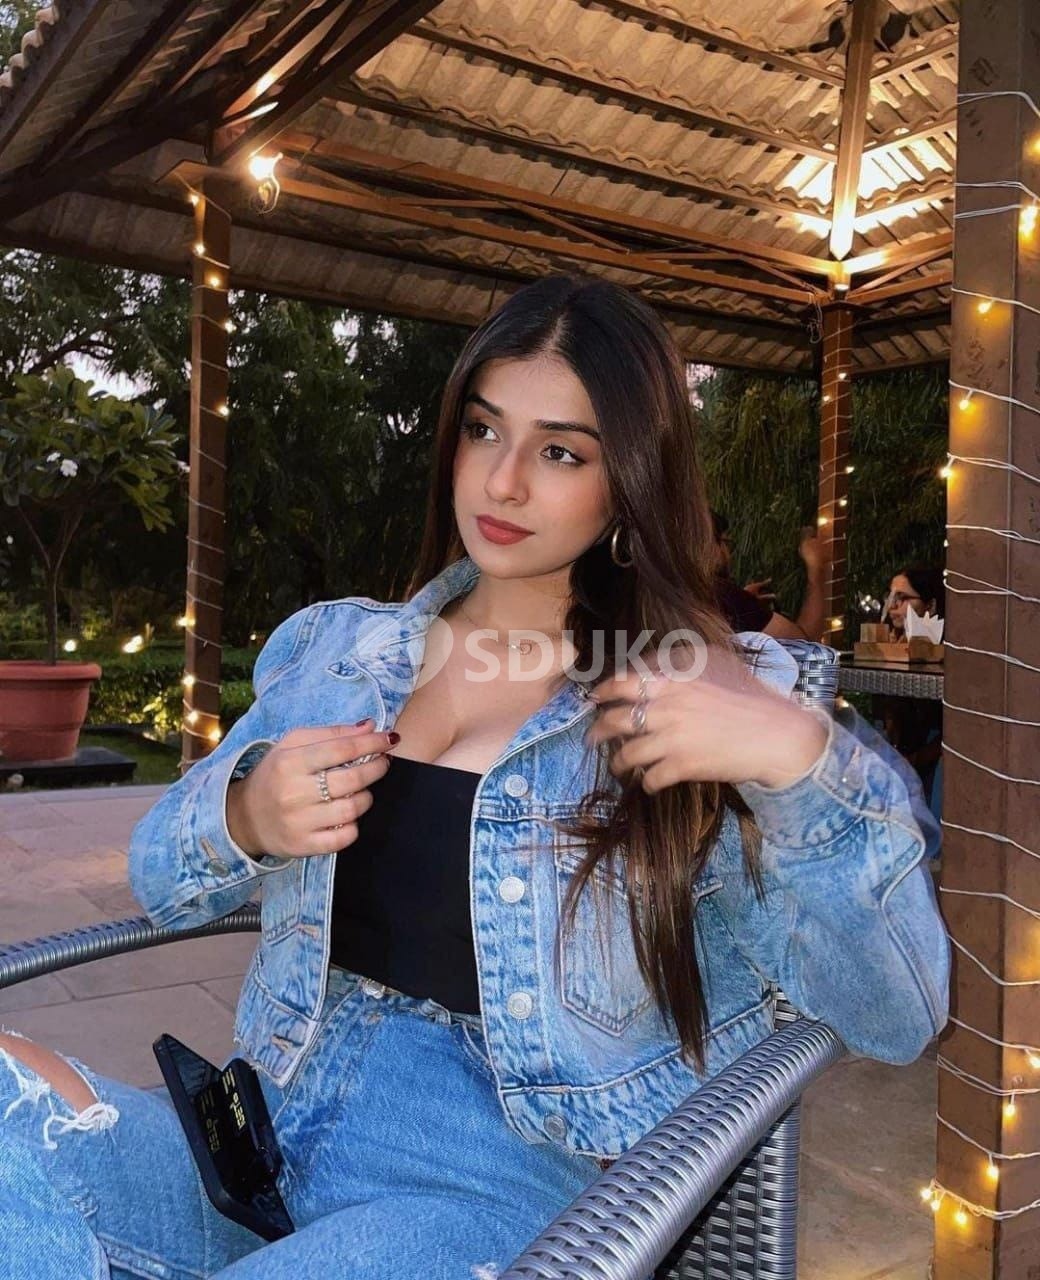 MOGA ❣️T0P,❣️ BEST VIP ✅ INDEPENDENT✅ COLL GIRL SERVICE AVAILABLE ✅IN 24 HOURS.♥️